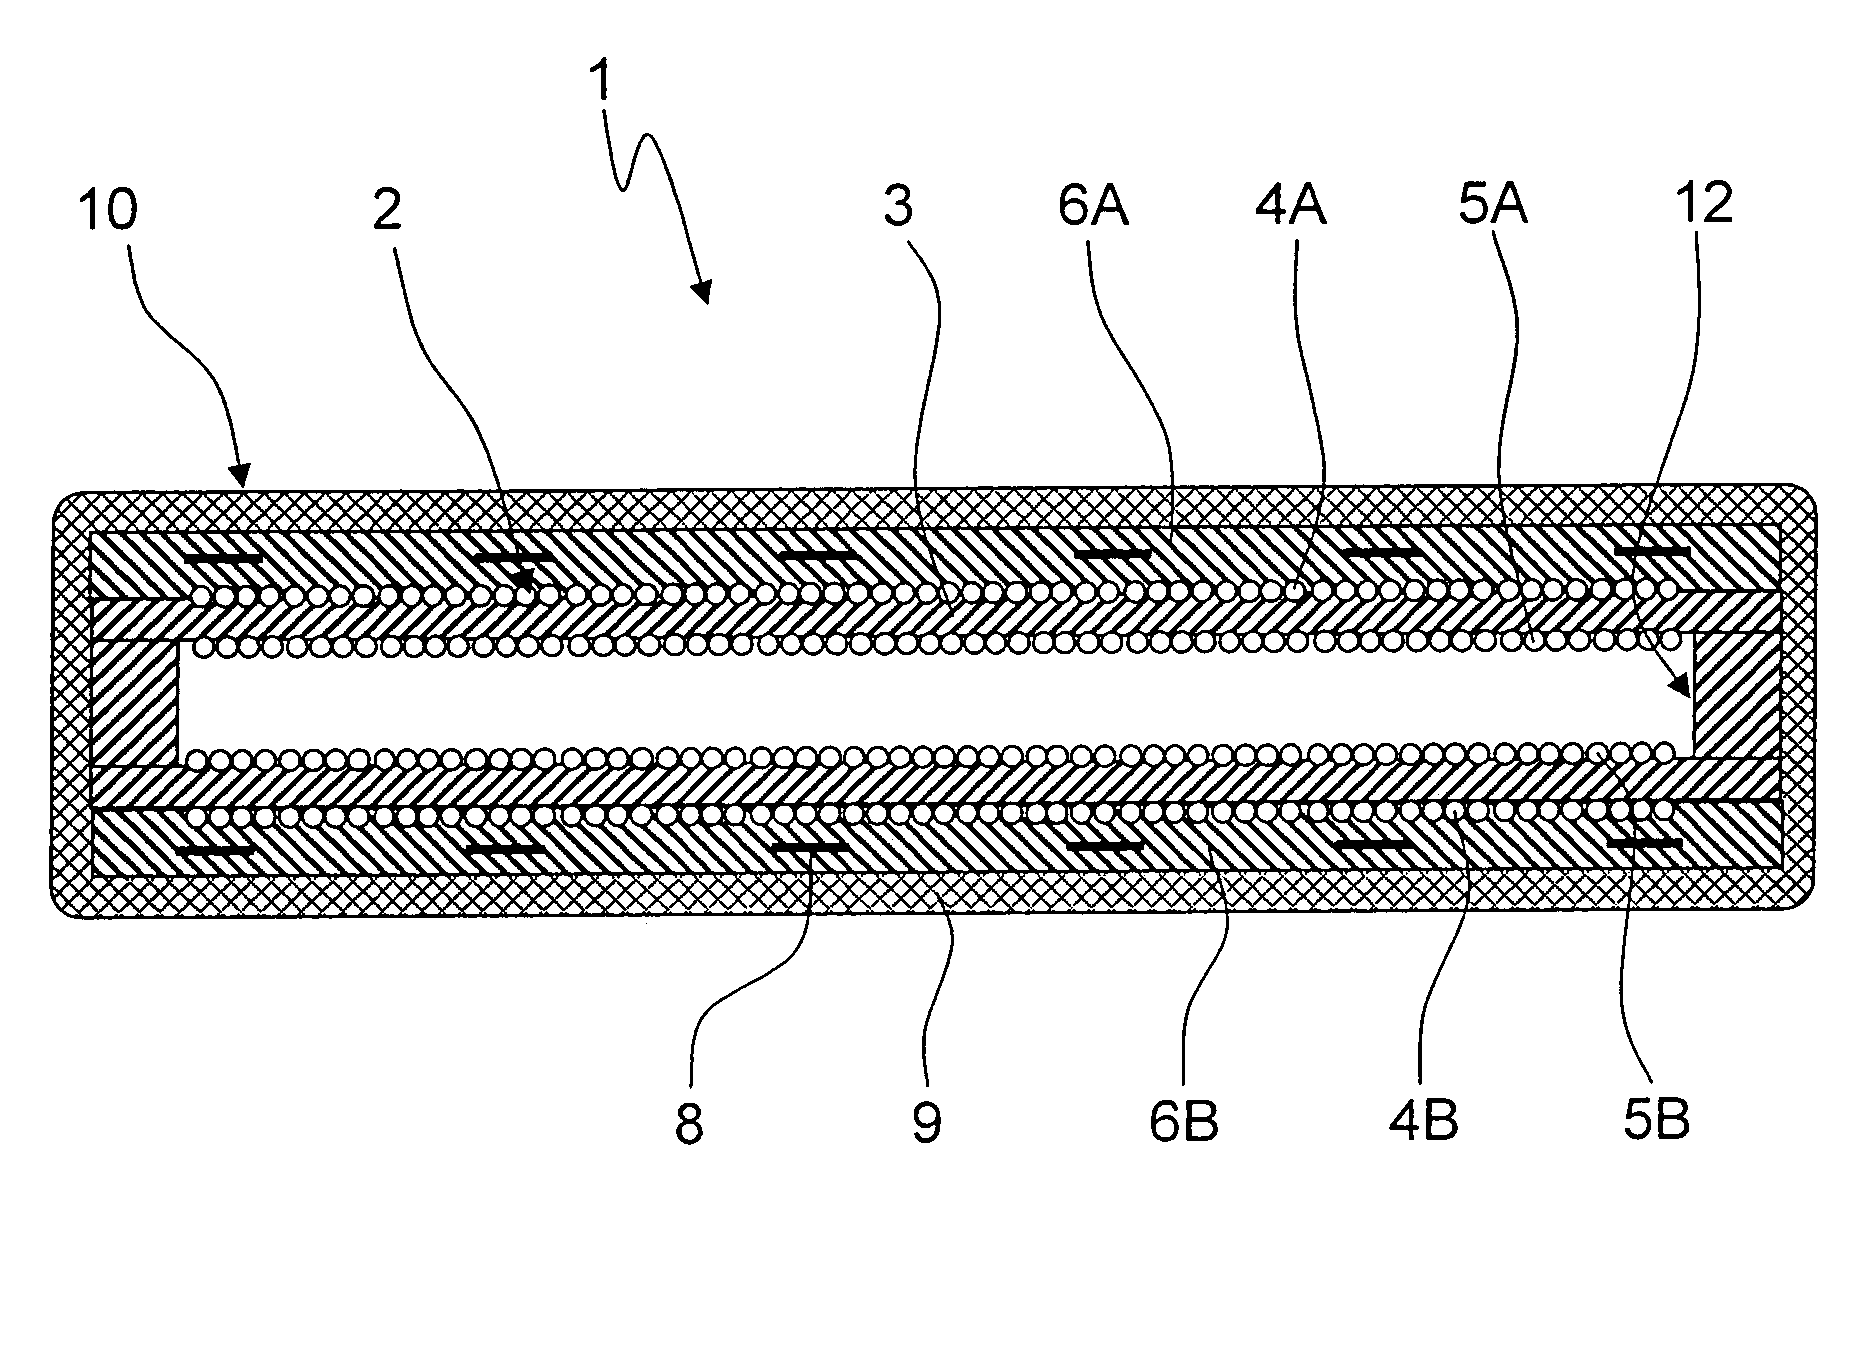 Ignition system of an internal combustion engine